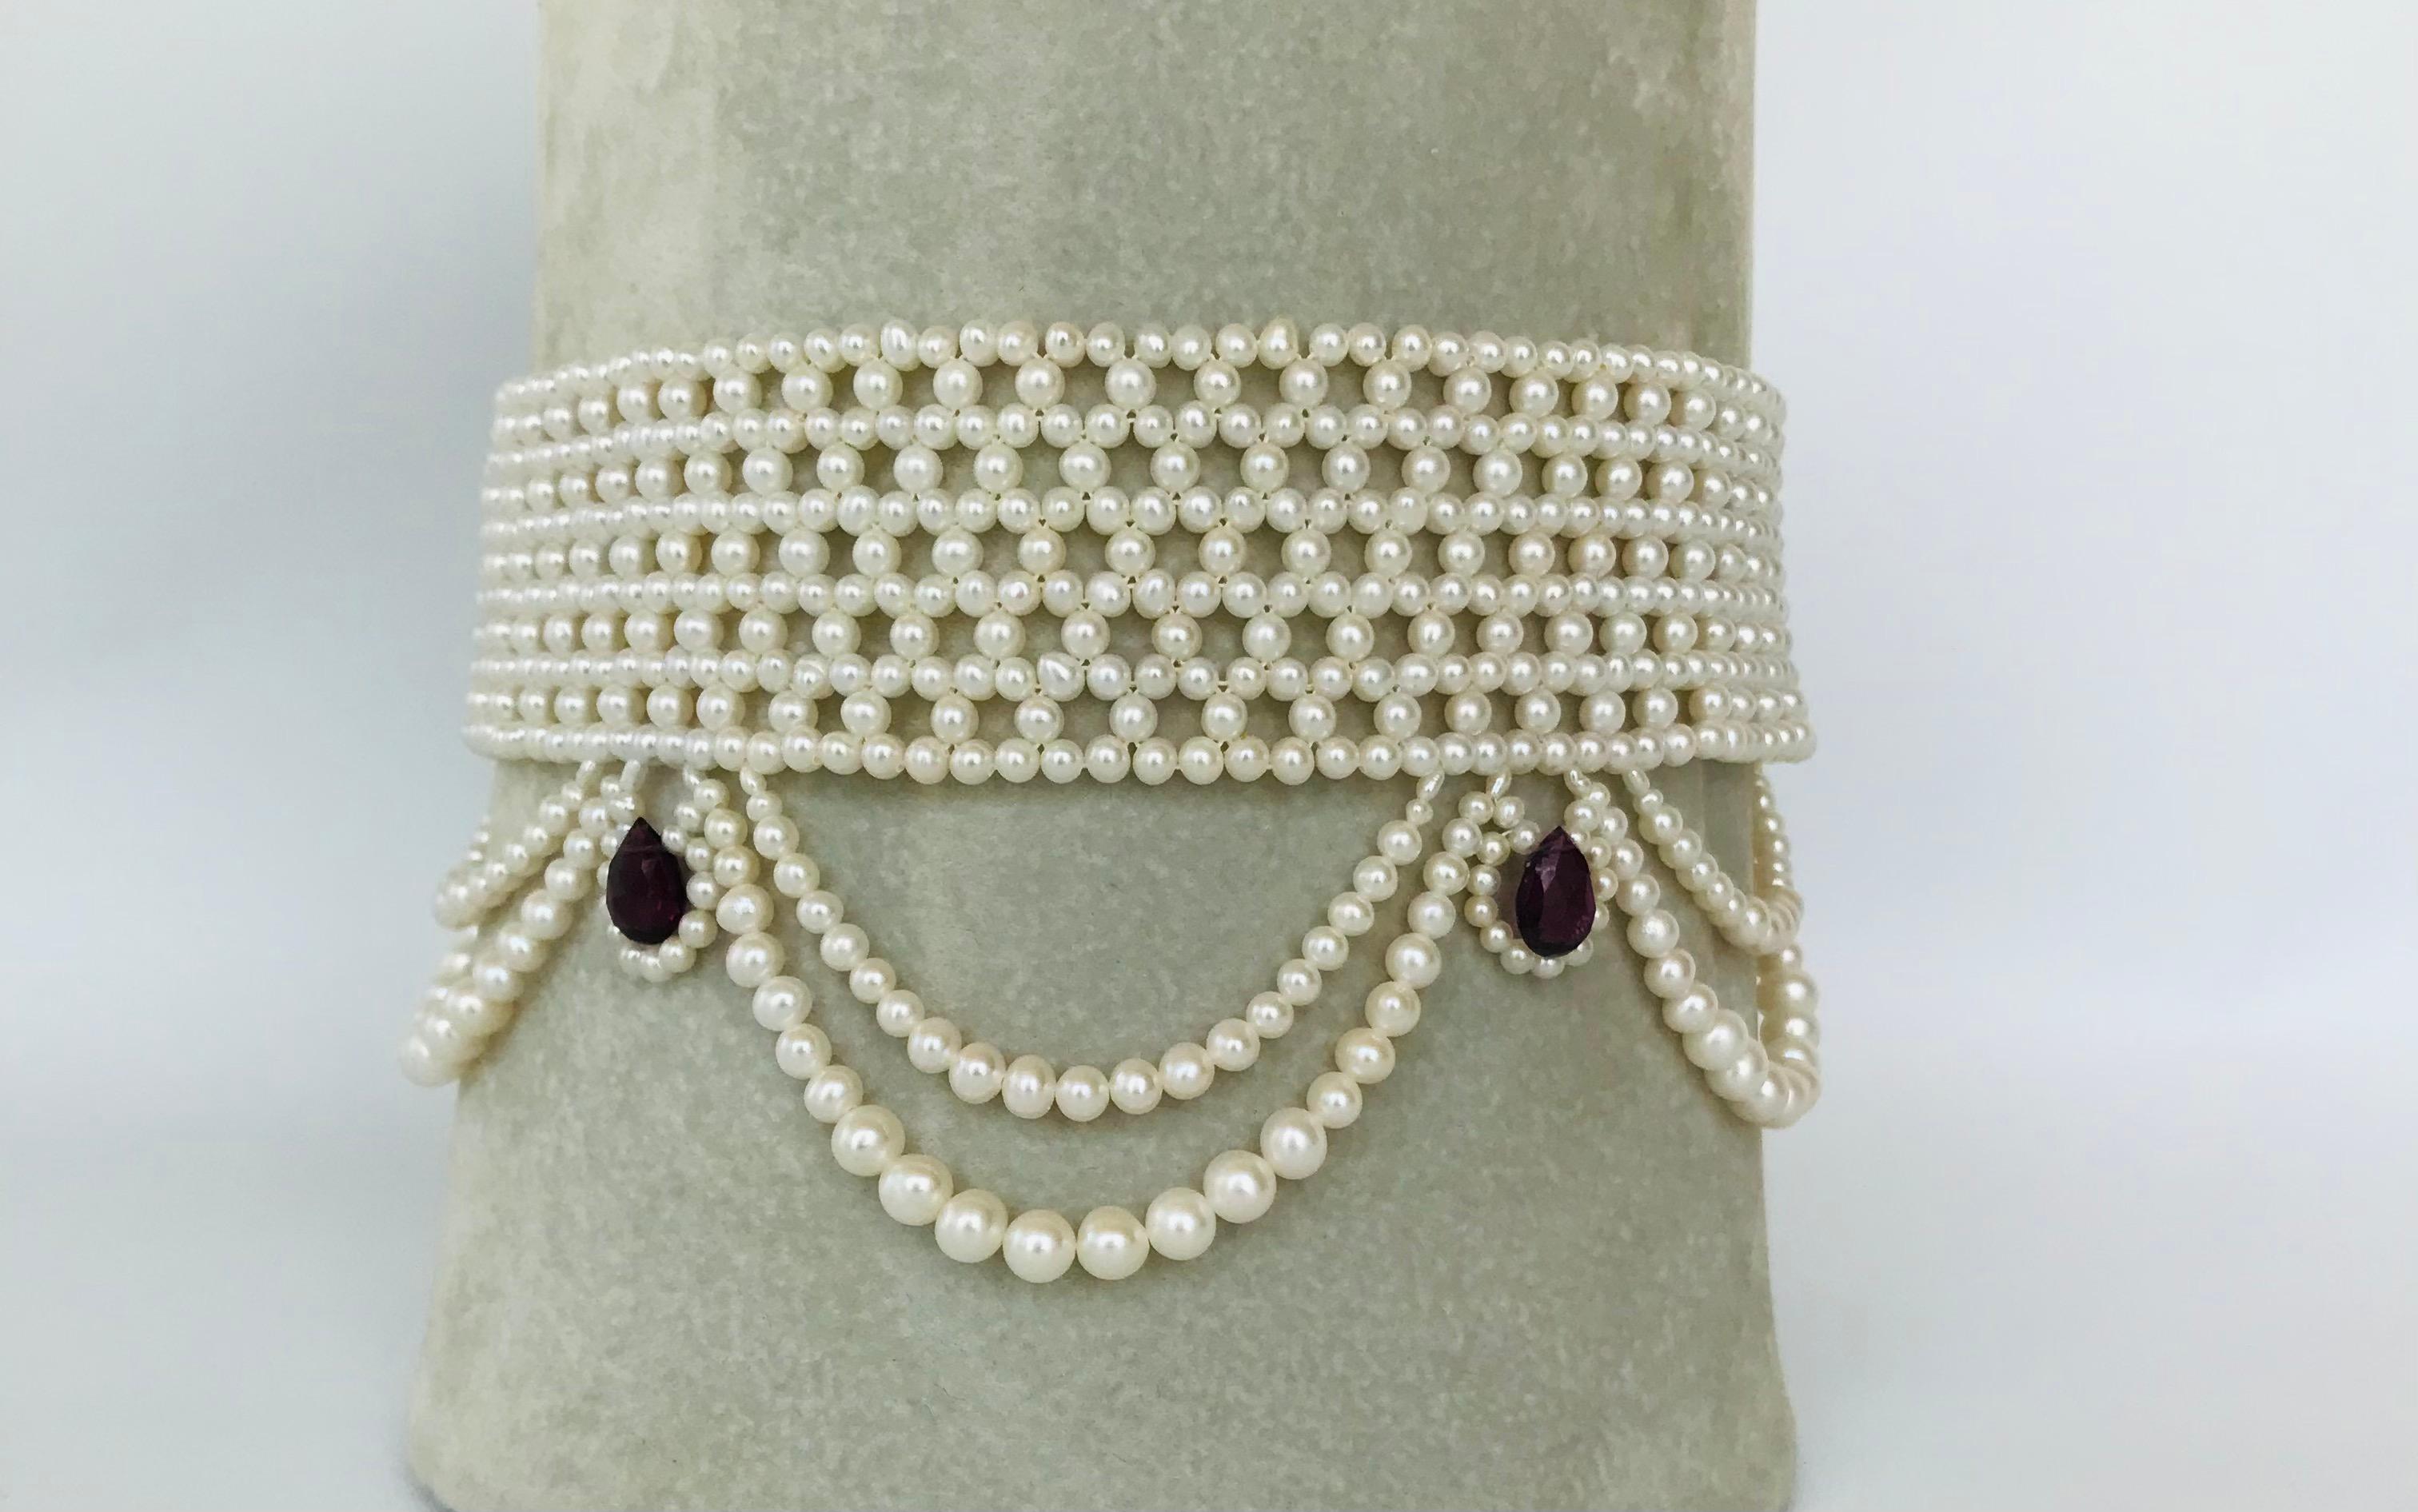 Marina J Woven Pearl Choker with Pearl Drapes, Garnet Briolettes and 14 K Gold 5